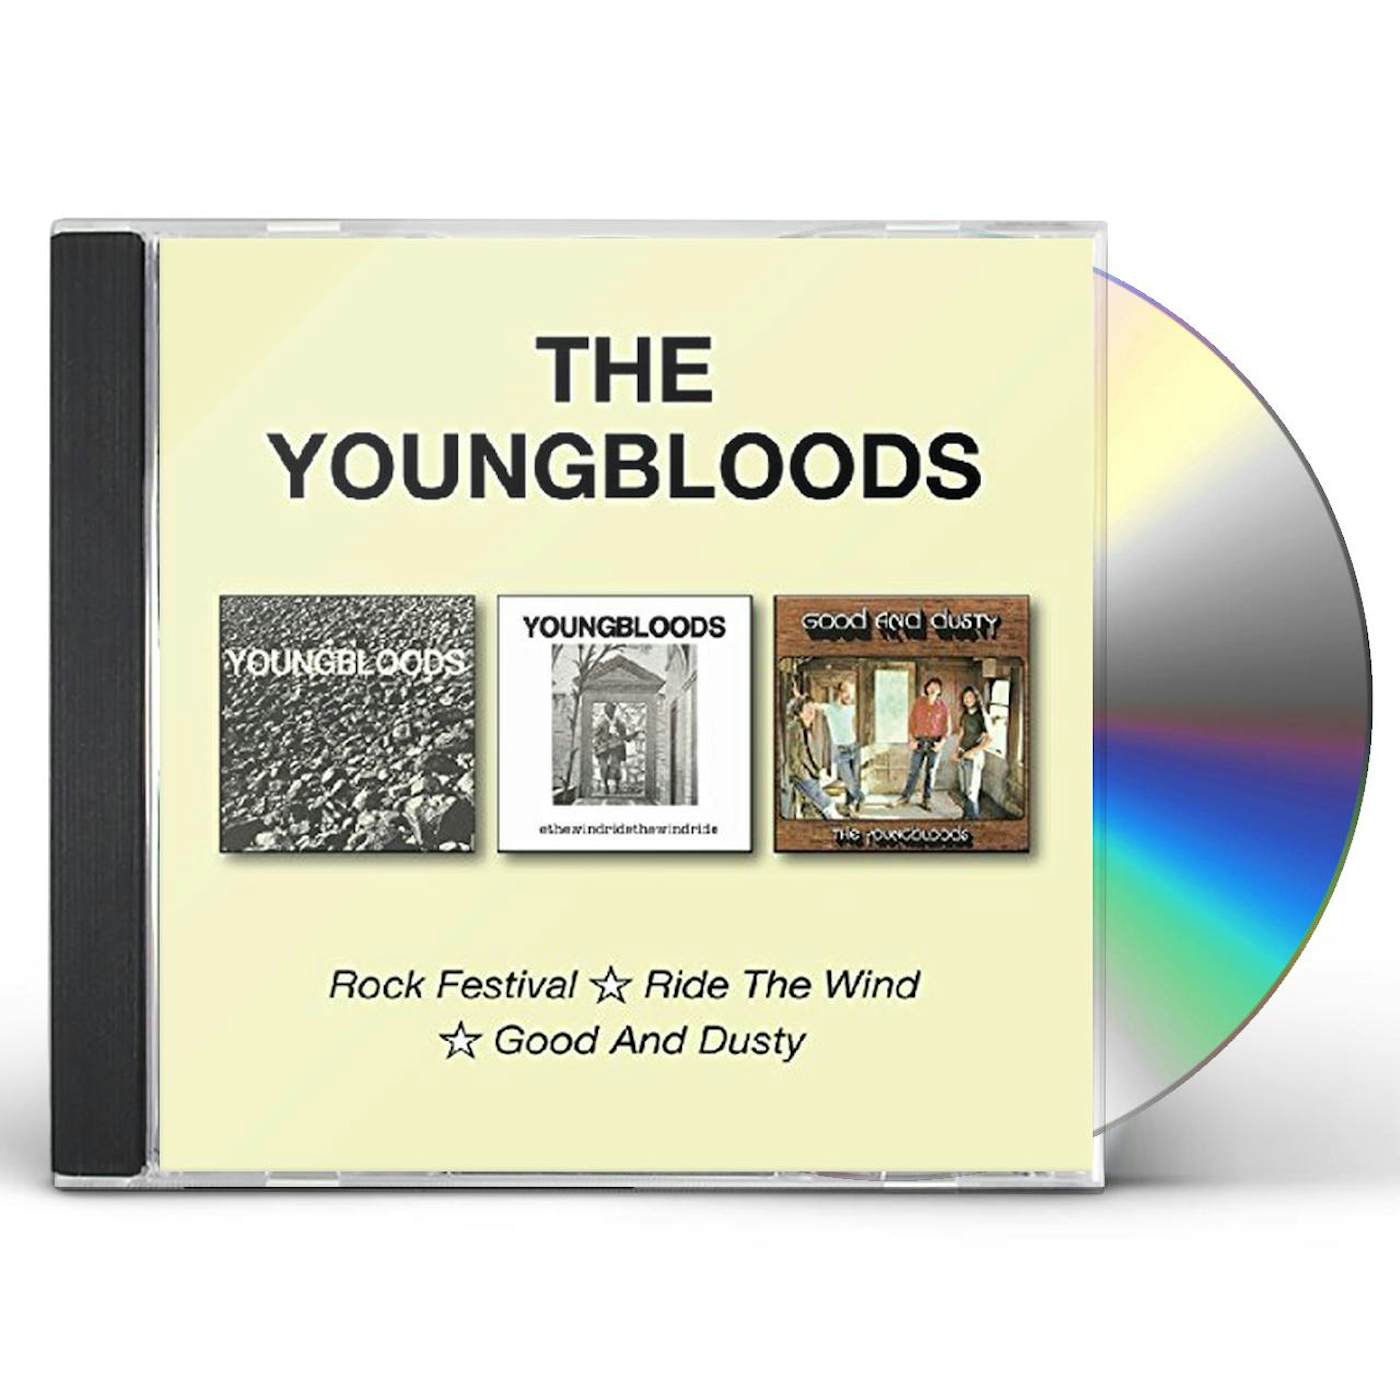 The Youngbloods ROCK FESTIVAL / RIDE THE WIND / GOOD & DUSTY CD